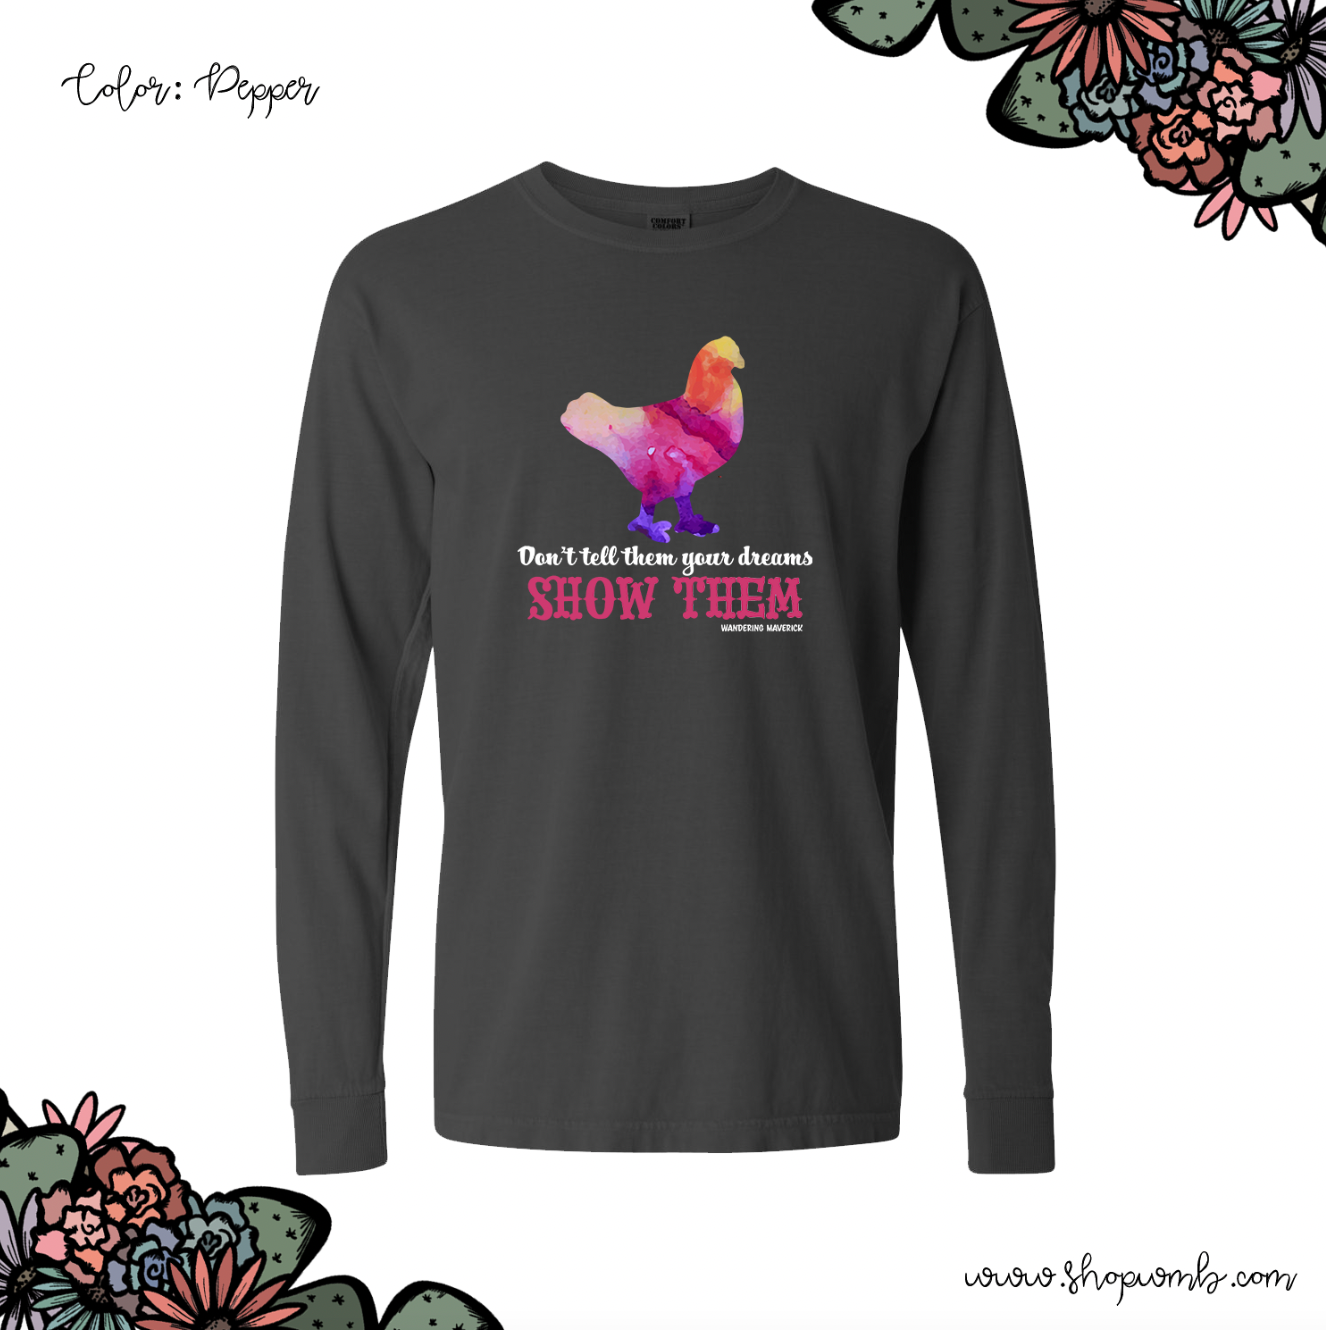 Show Them Chicken LONG SLEEVE T-Shirt (S-3XL) - Multiple Colors!